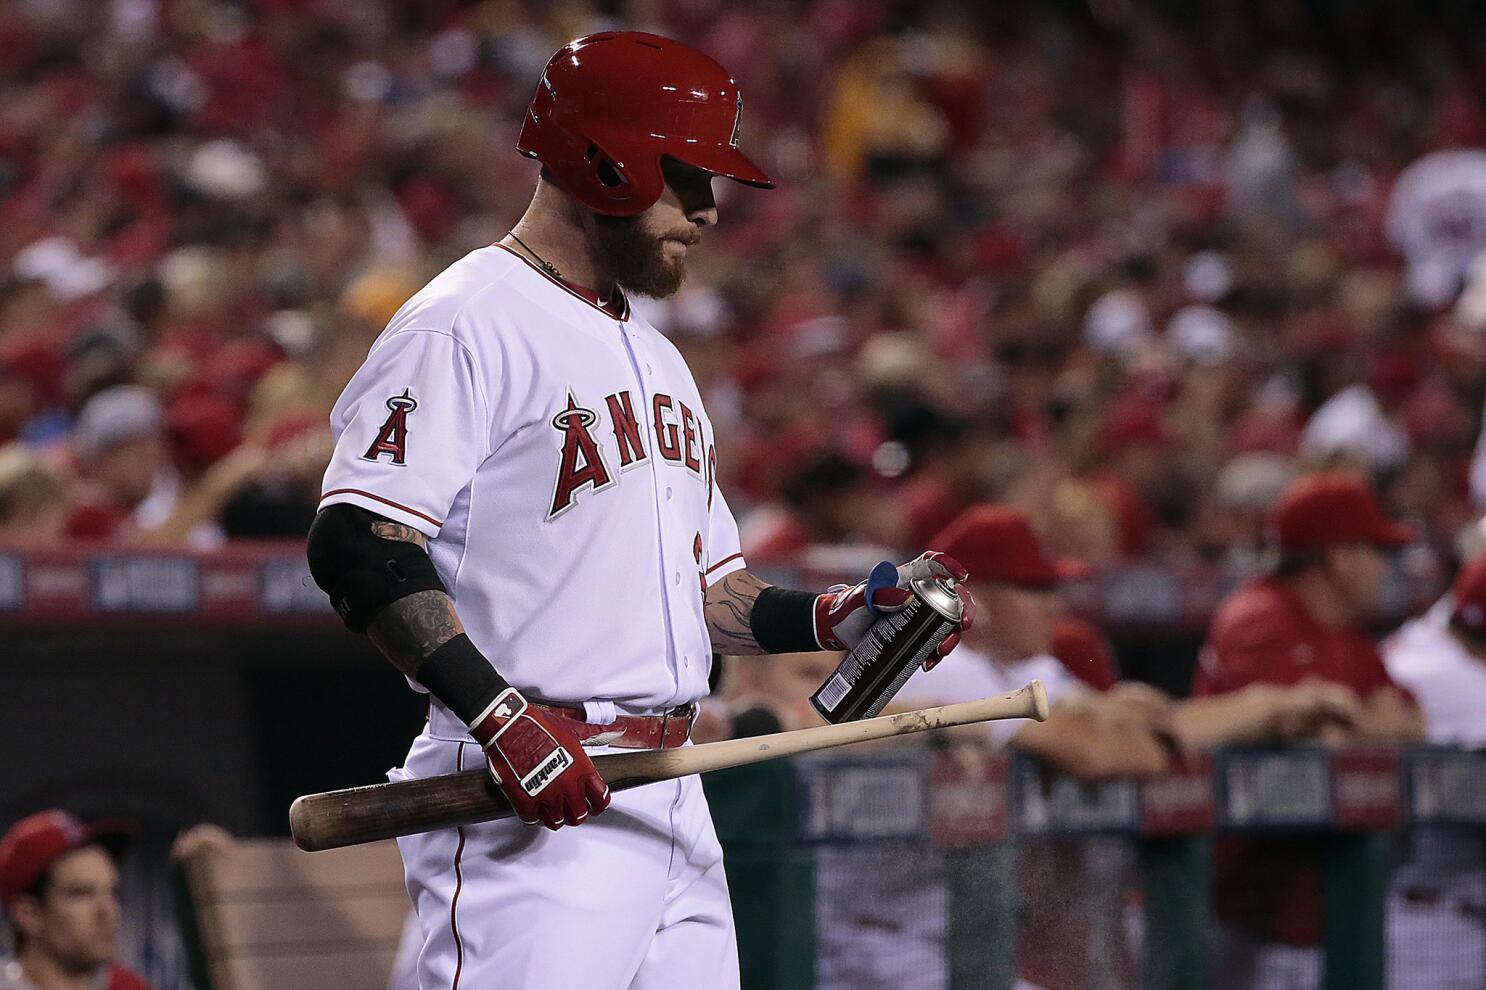 Angels may send Josh Hamilton back to Texas Rangers afer drug relapse